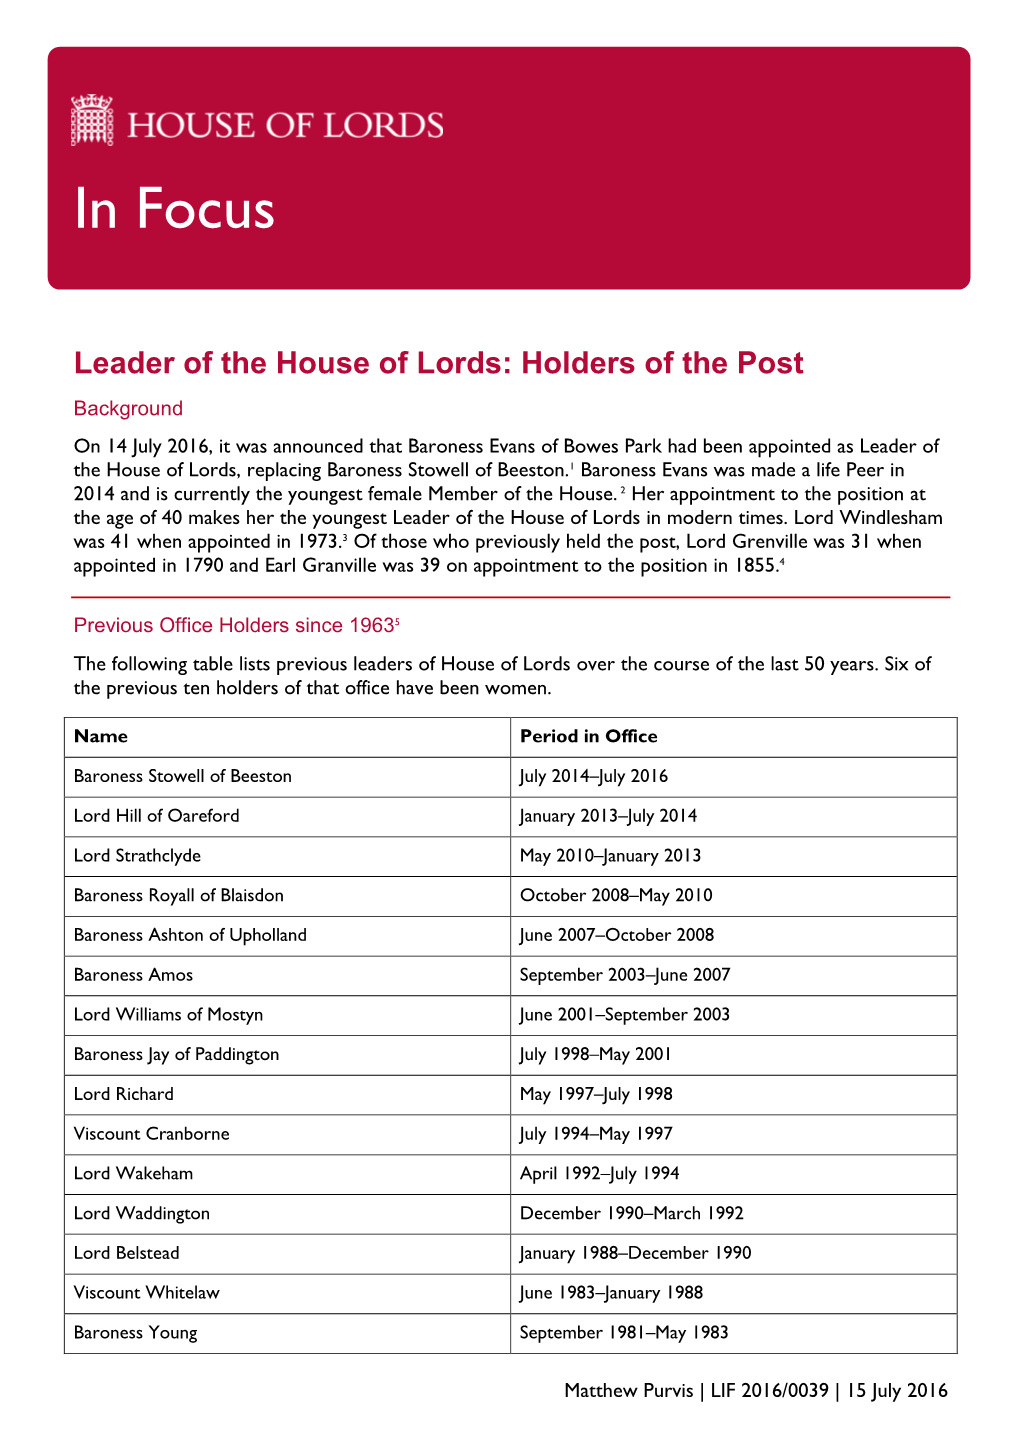 Leader of the House of Lords: Holders of the Post